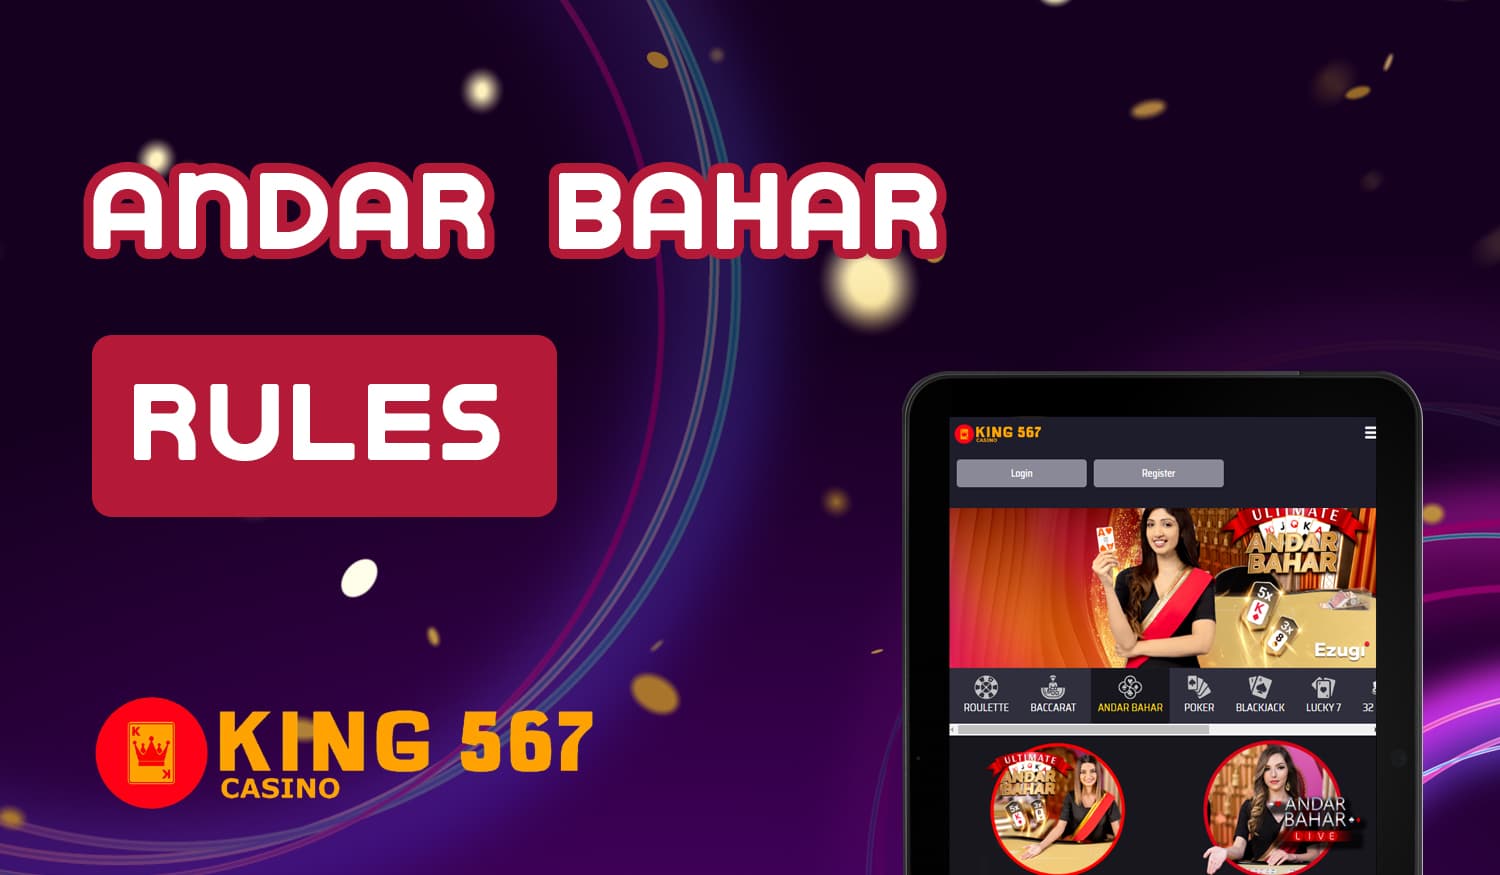 King 567 Casino Andar Bahar Basic Rules for Indian Users